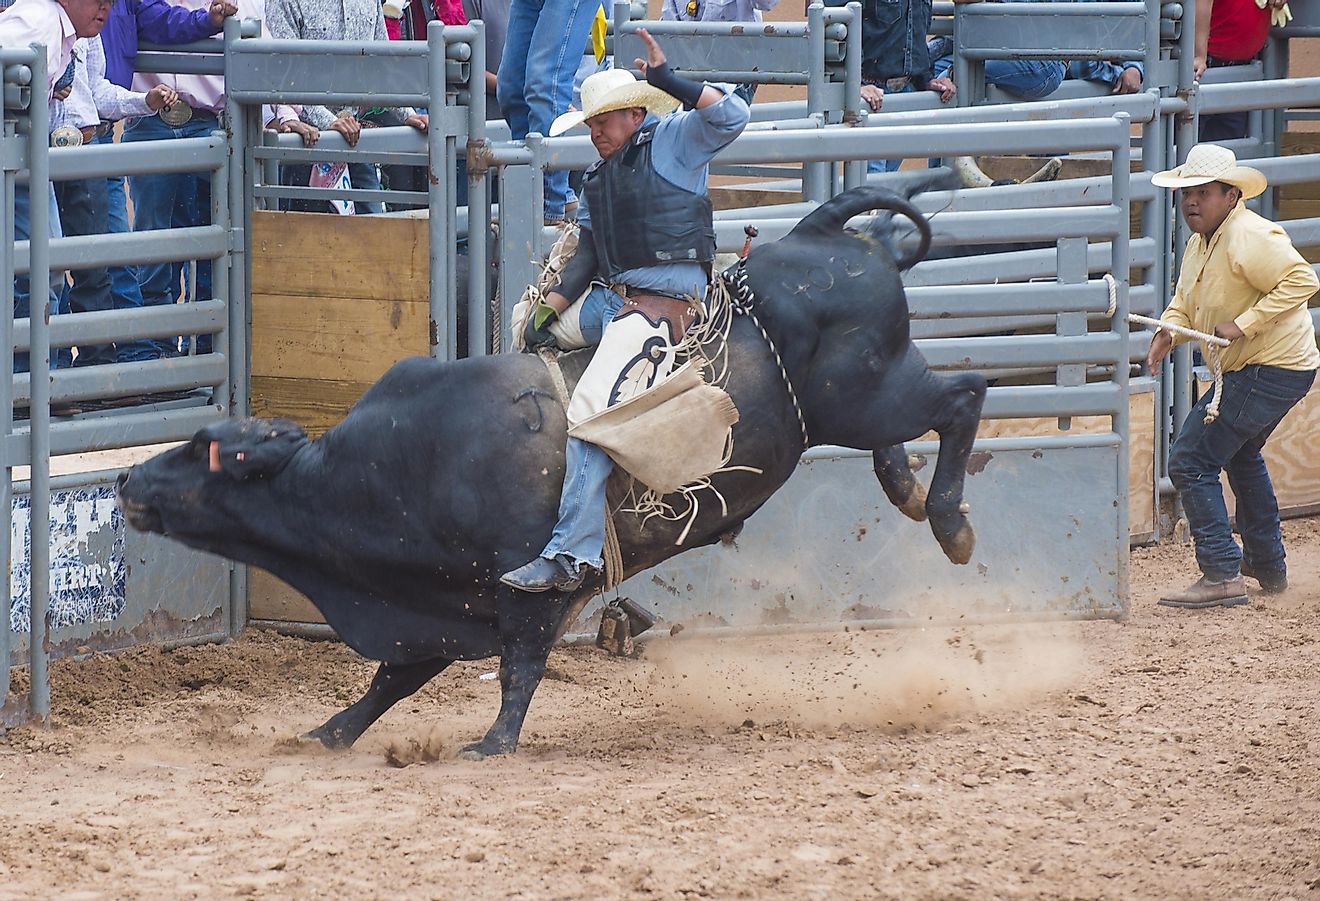 This rodeo sport is quite simple - you have to survive as long as you can on top of a raging bull. Image credit: Kobby Dagan / Shutterstock.com